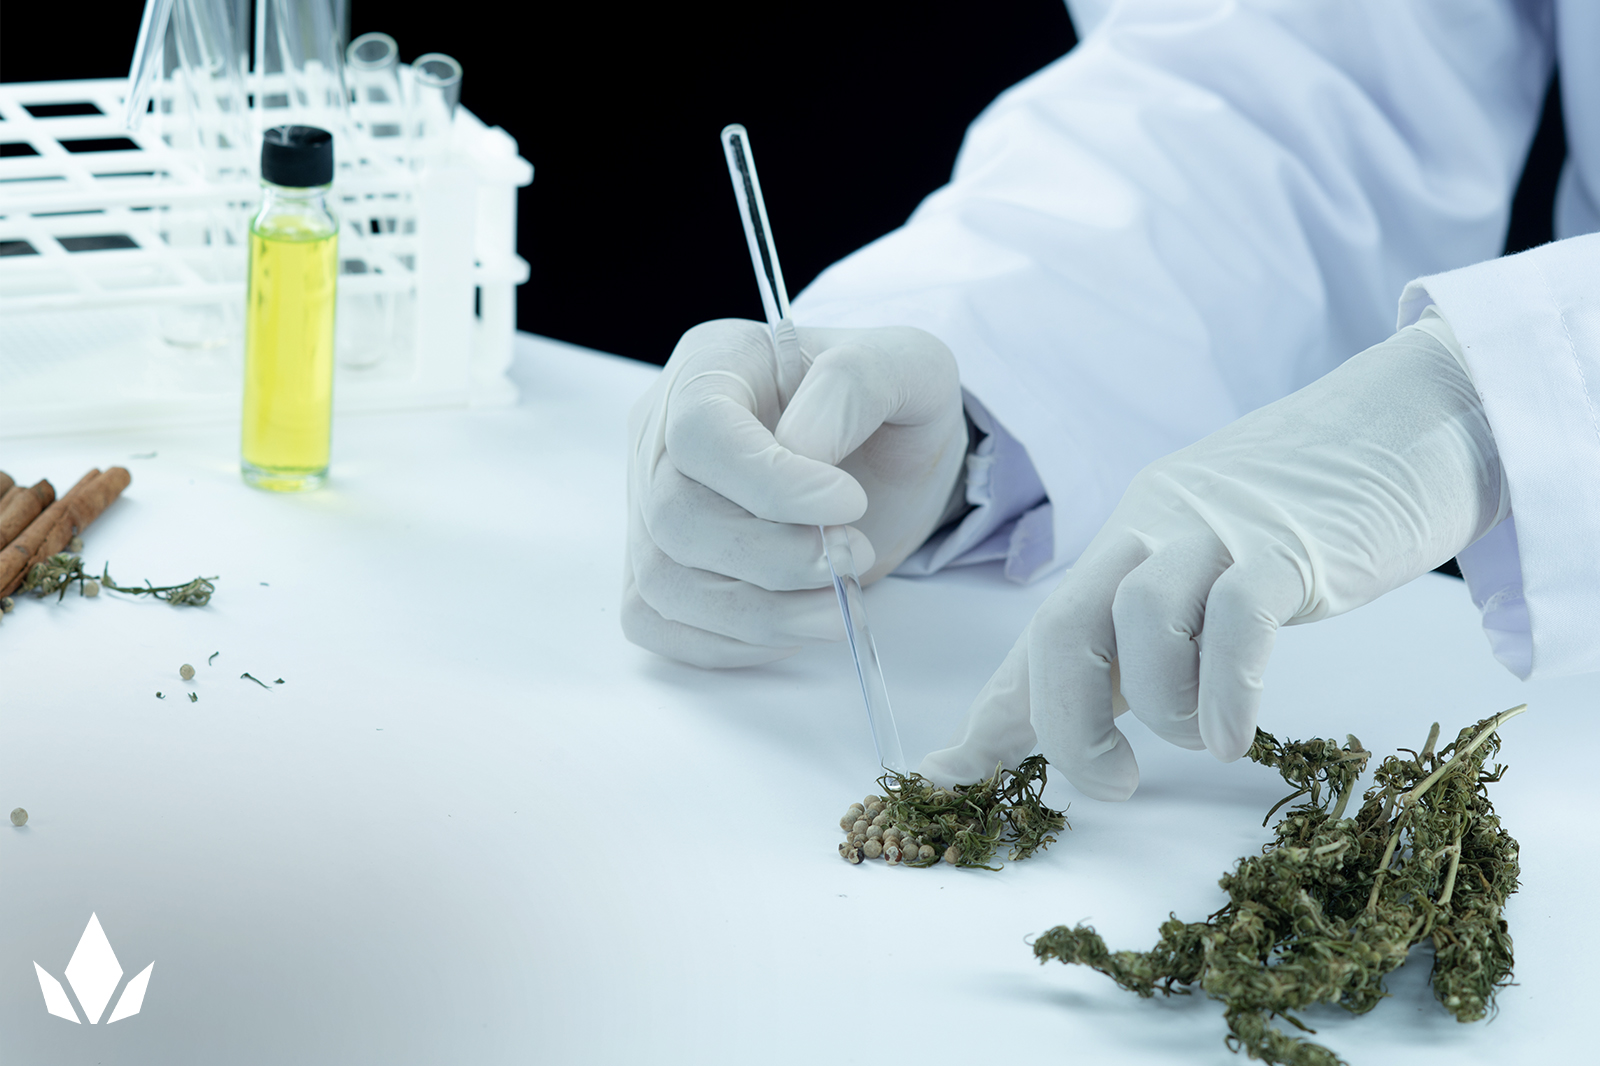 A scientist examines a cannabis plant with other plants kept beside them